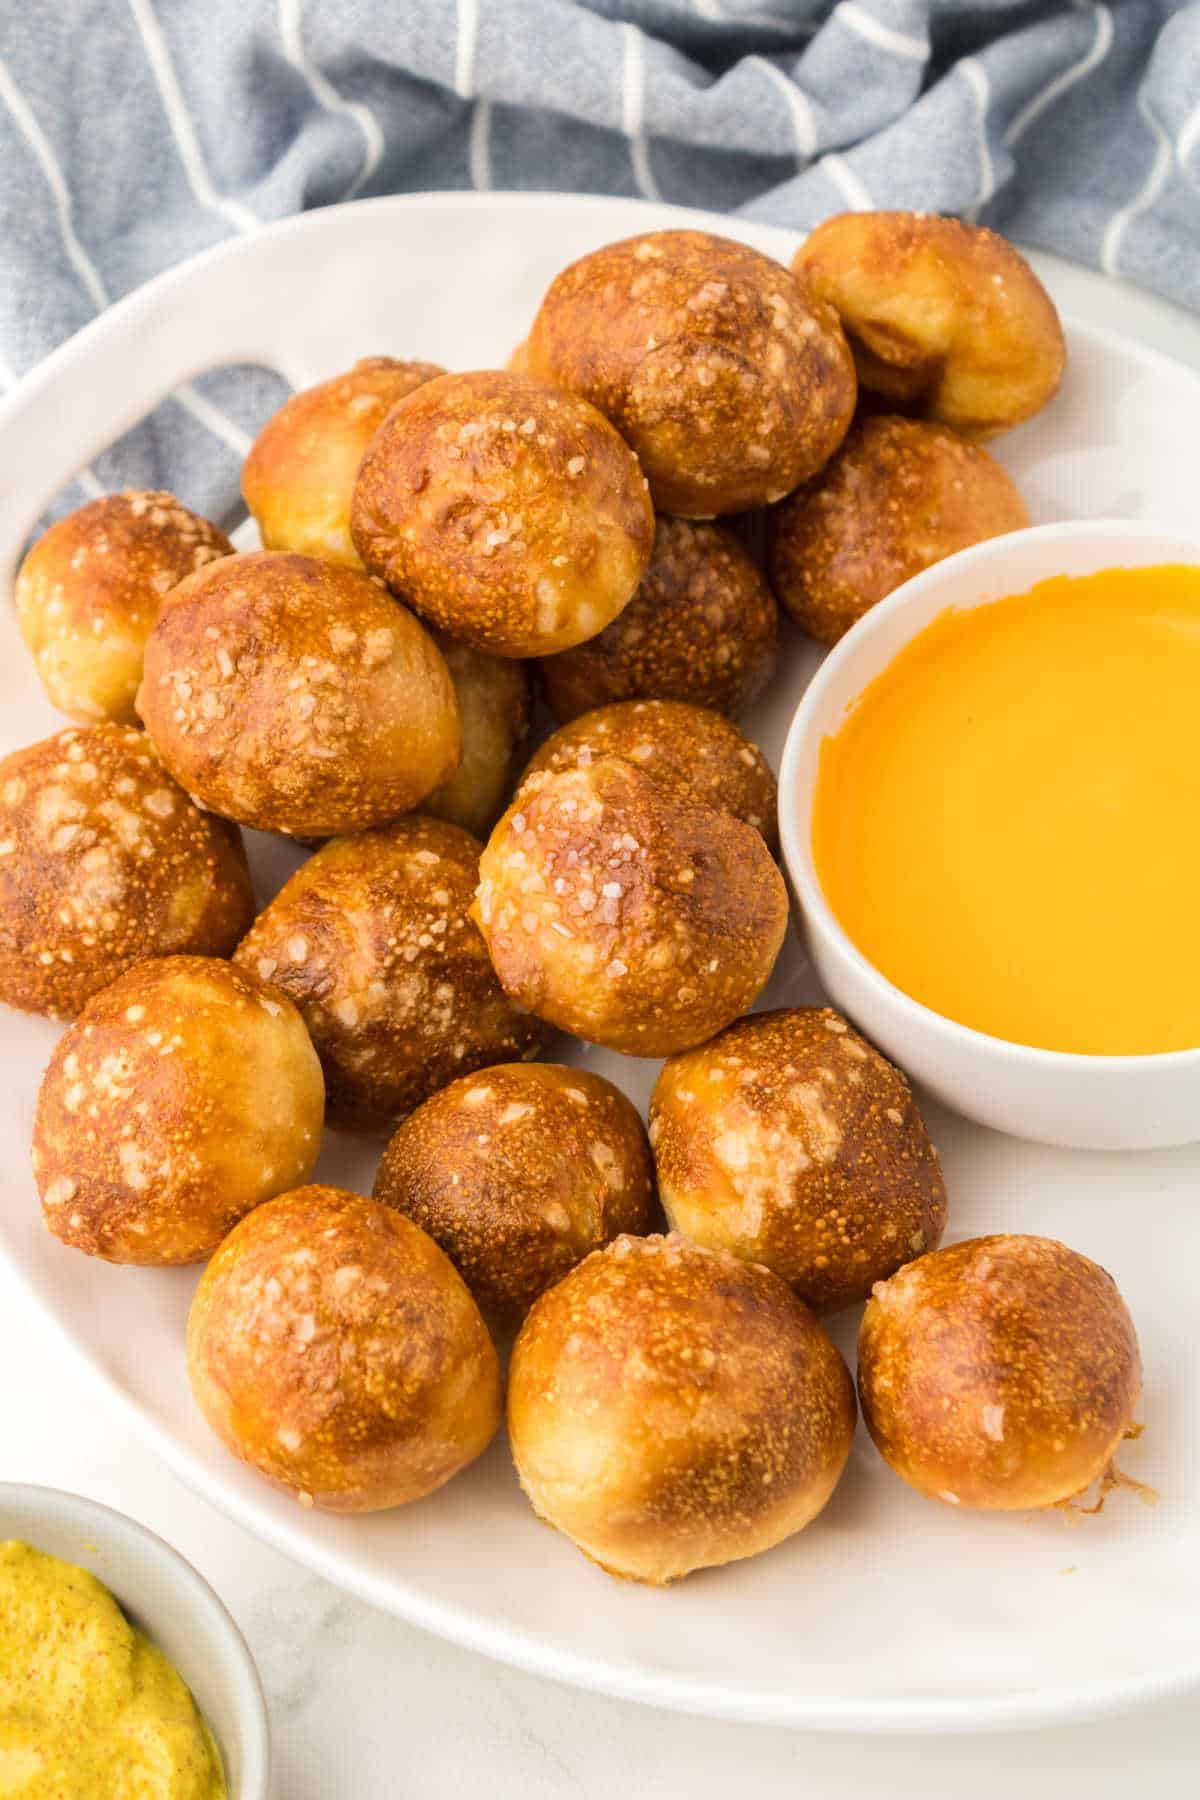 A plate of pretzel bites and cheese sauce.